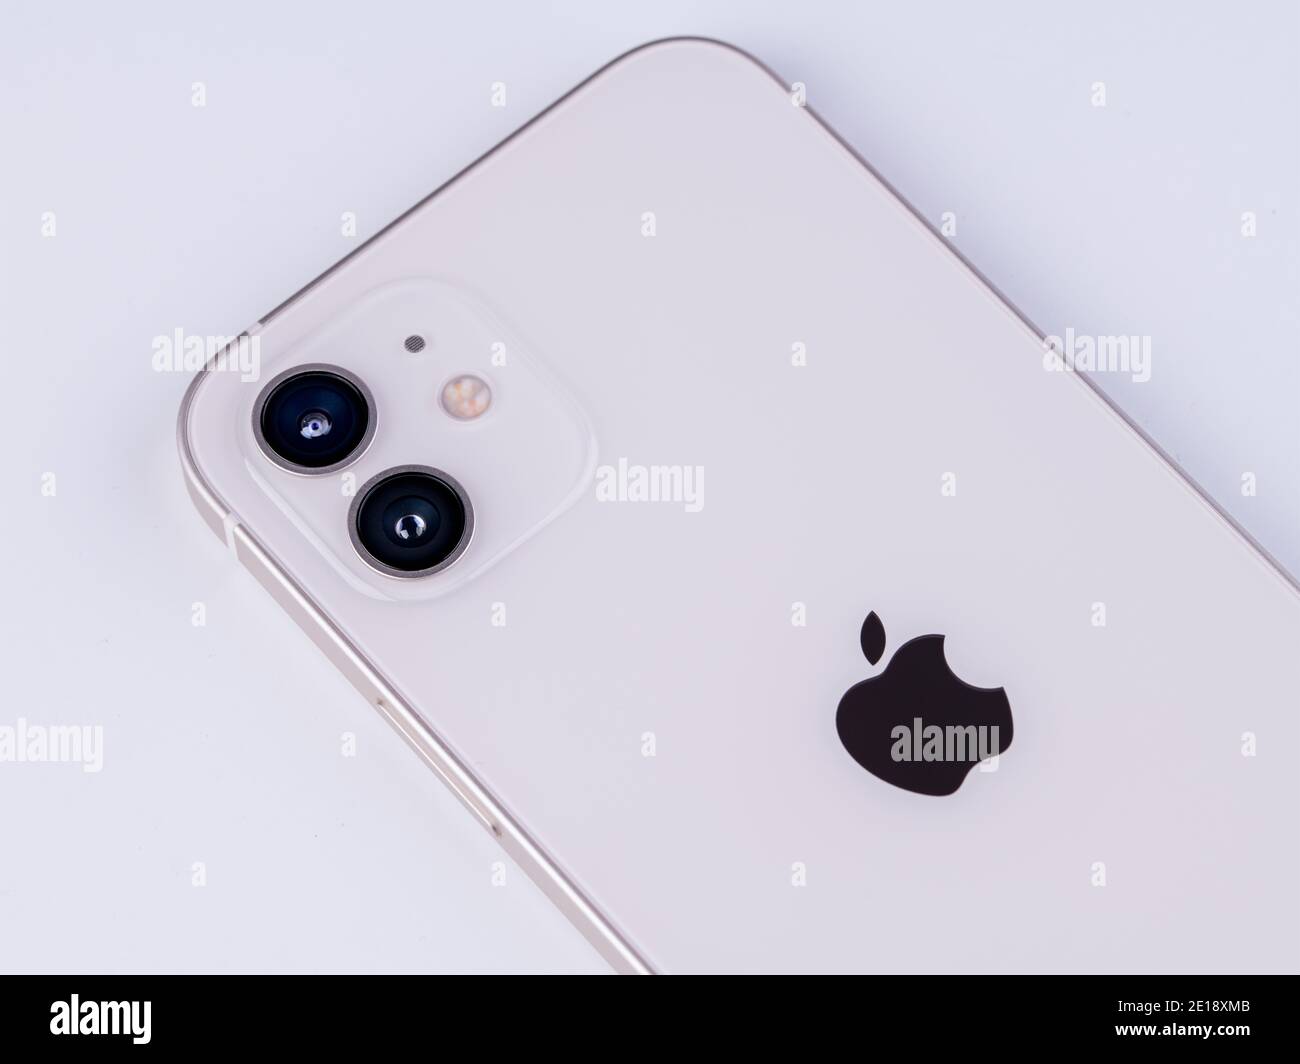 Antalya, Turkey - January 05, 2021: Front and Back view of new iPhone 12 white smartphone Stock Photo